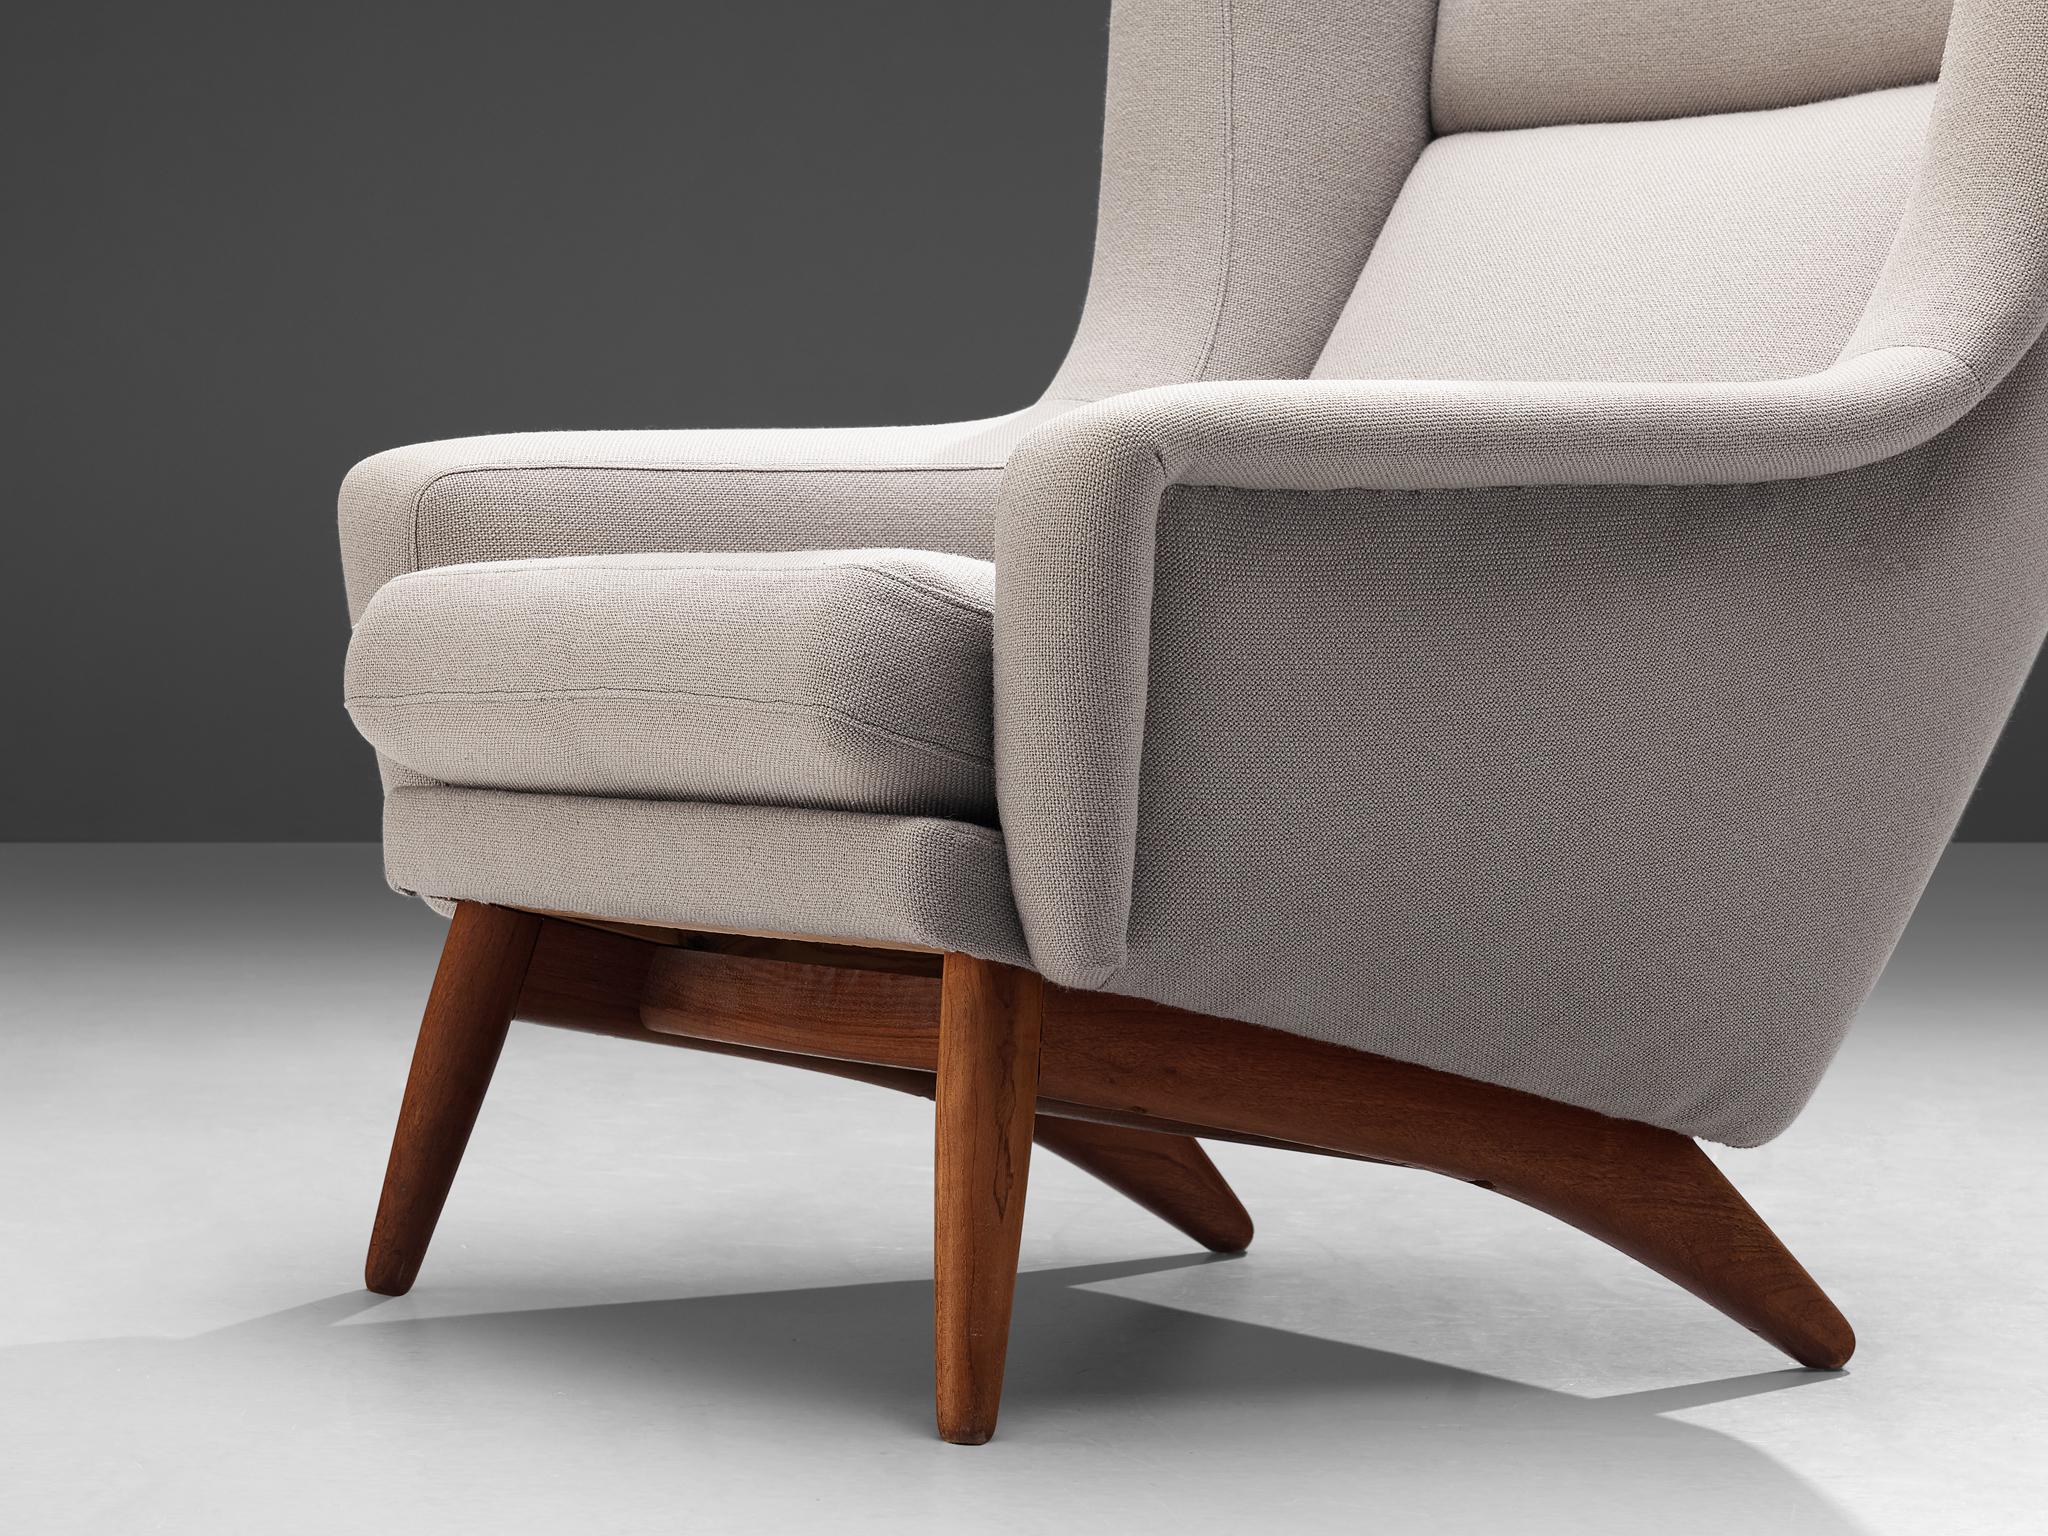 Customizable Danish Wing Back Chairs with Teak Frame